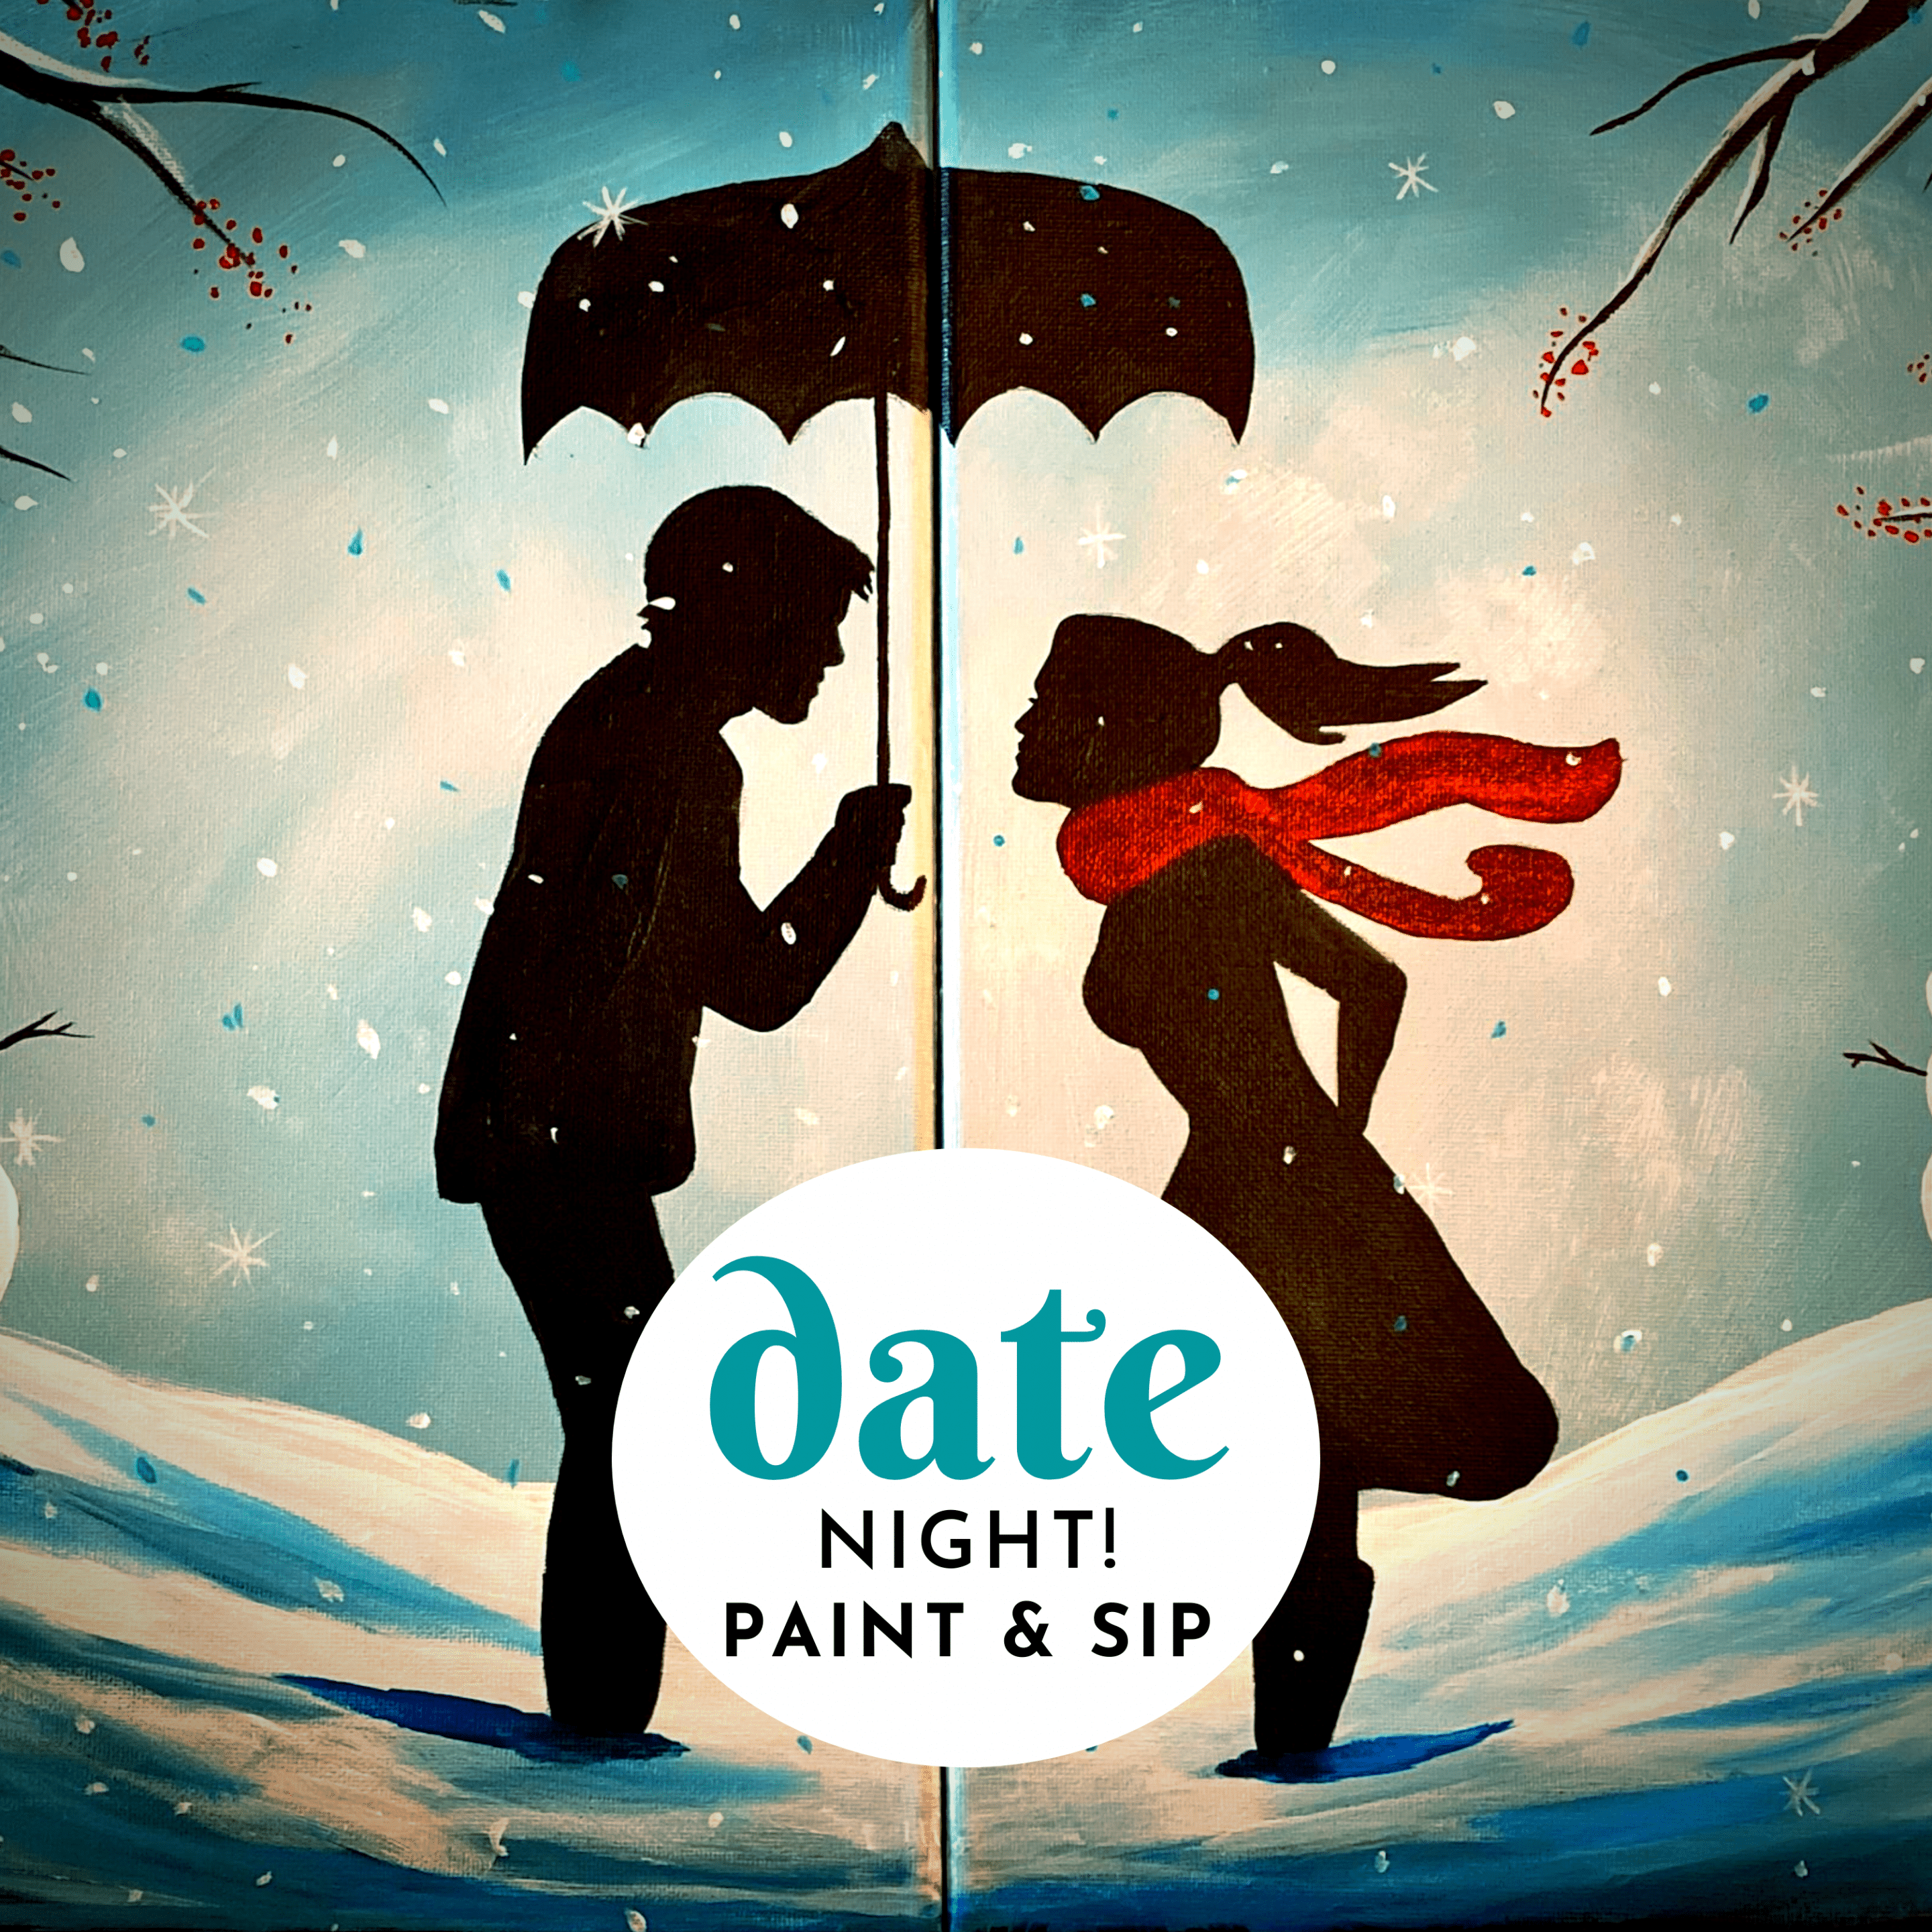 33 Stay-at-Home Winter Date Night Ideas - Artful Homemaking